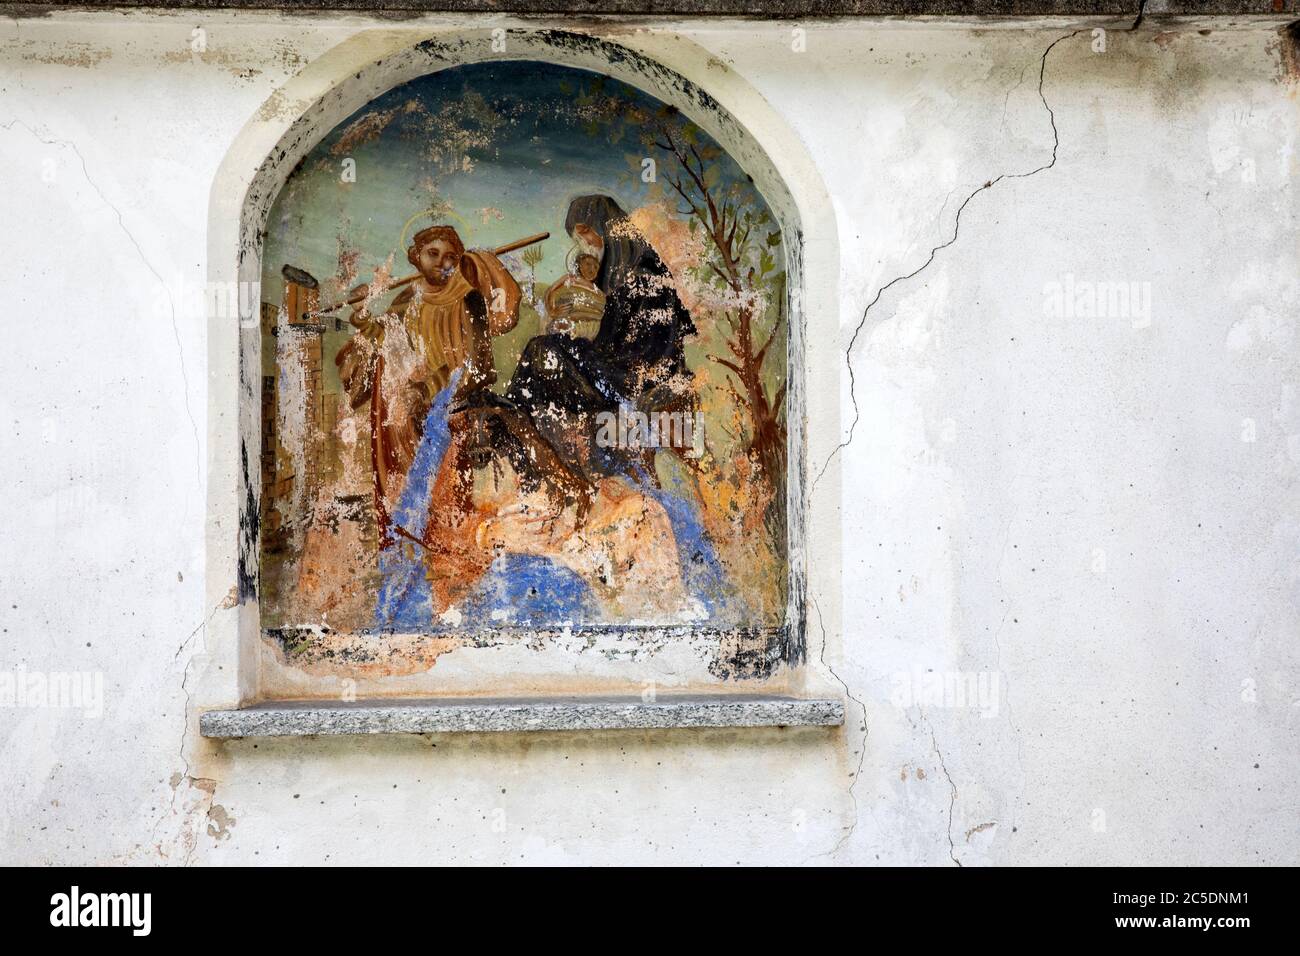 A religius paint at Canza village, Formazza Valley, Ossola Valley, VCO, Piedmont, Italy Stock Photo